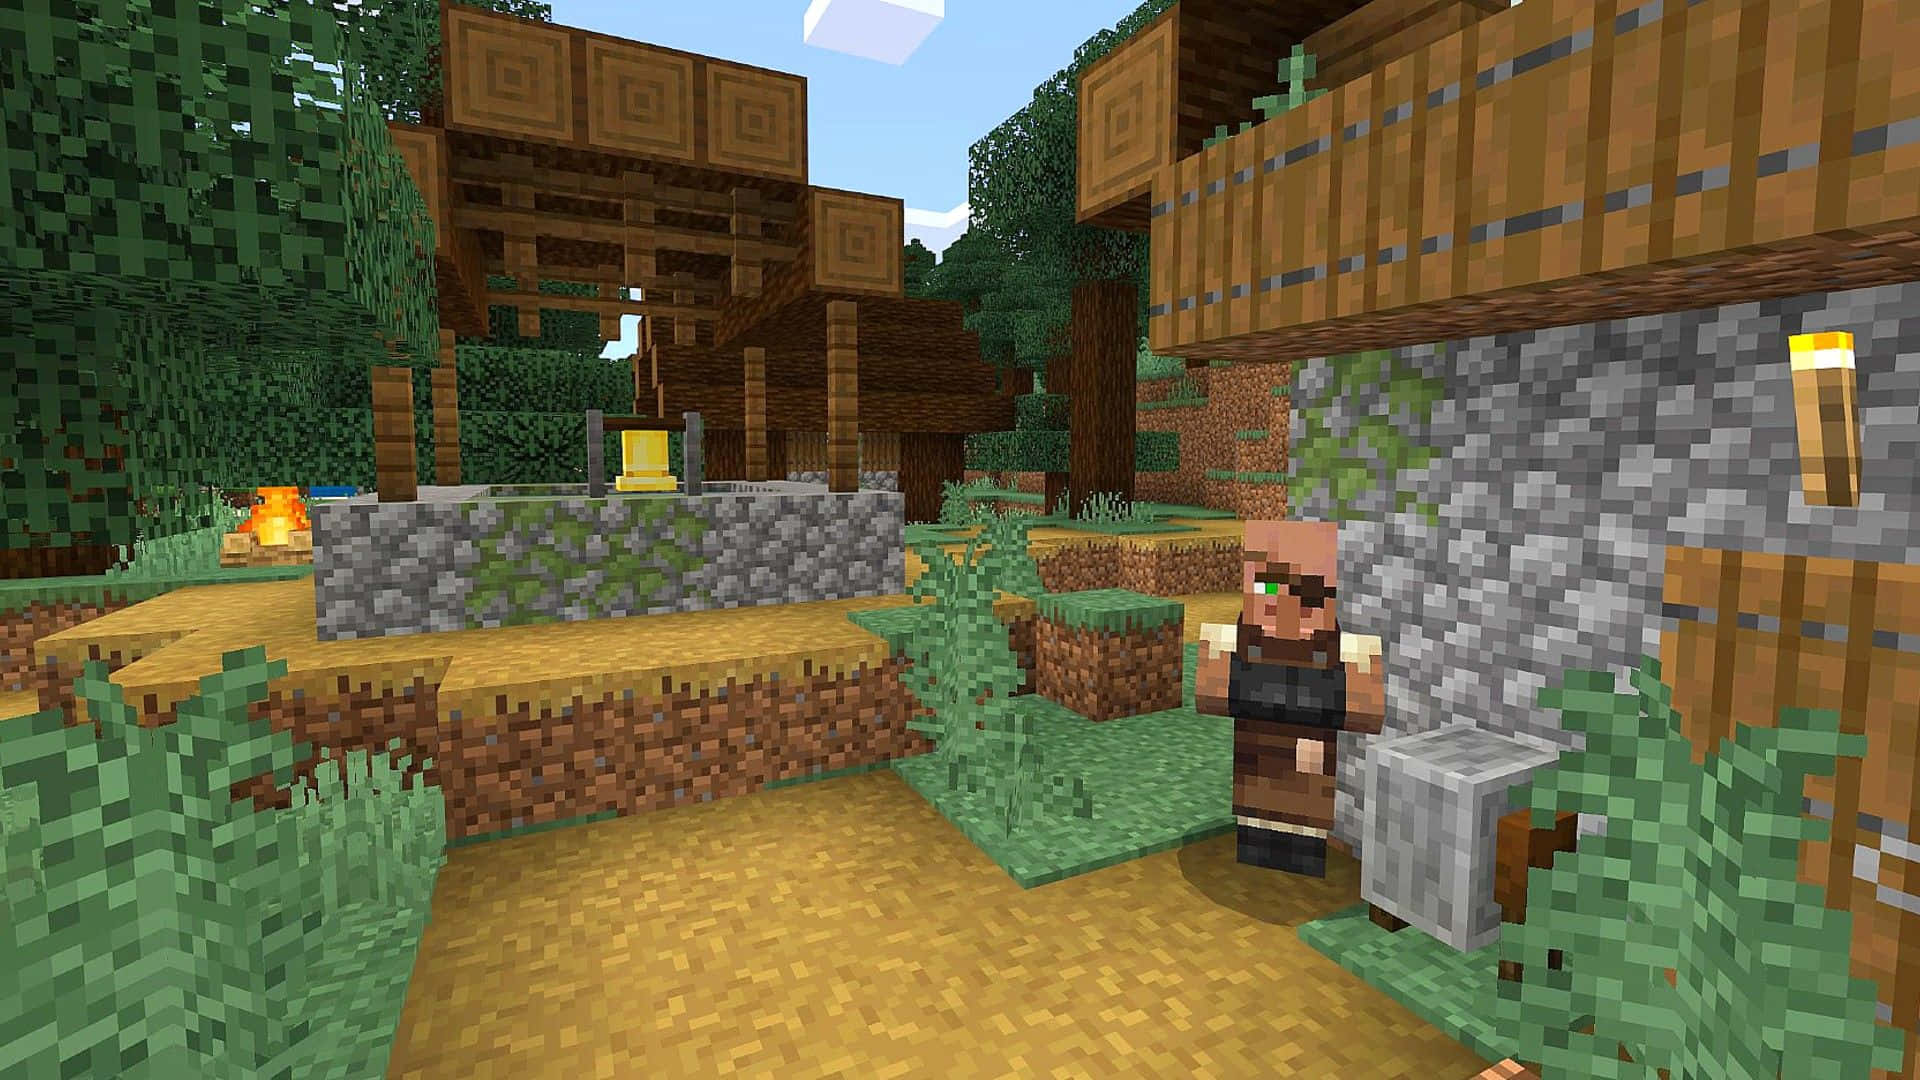 Minecraft Villager exploring the forest Wallpaper